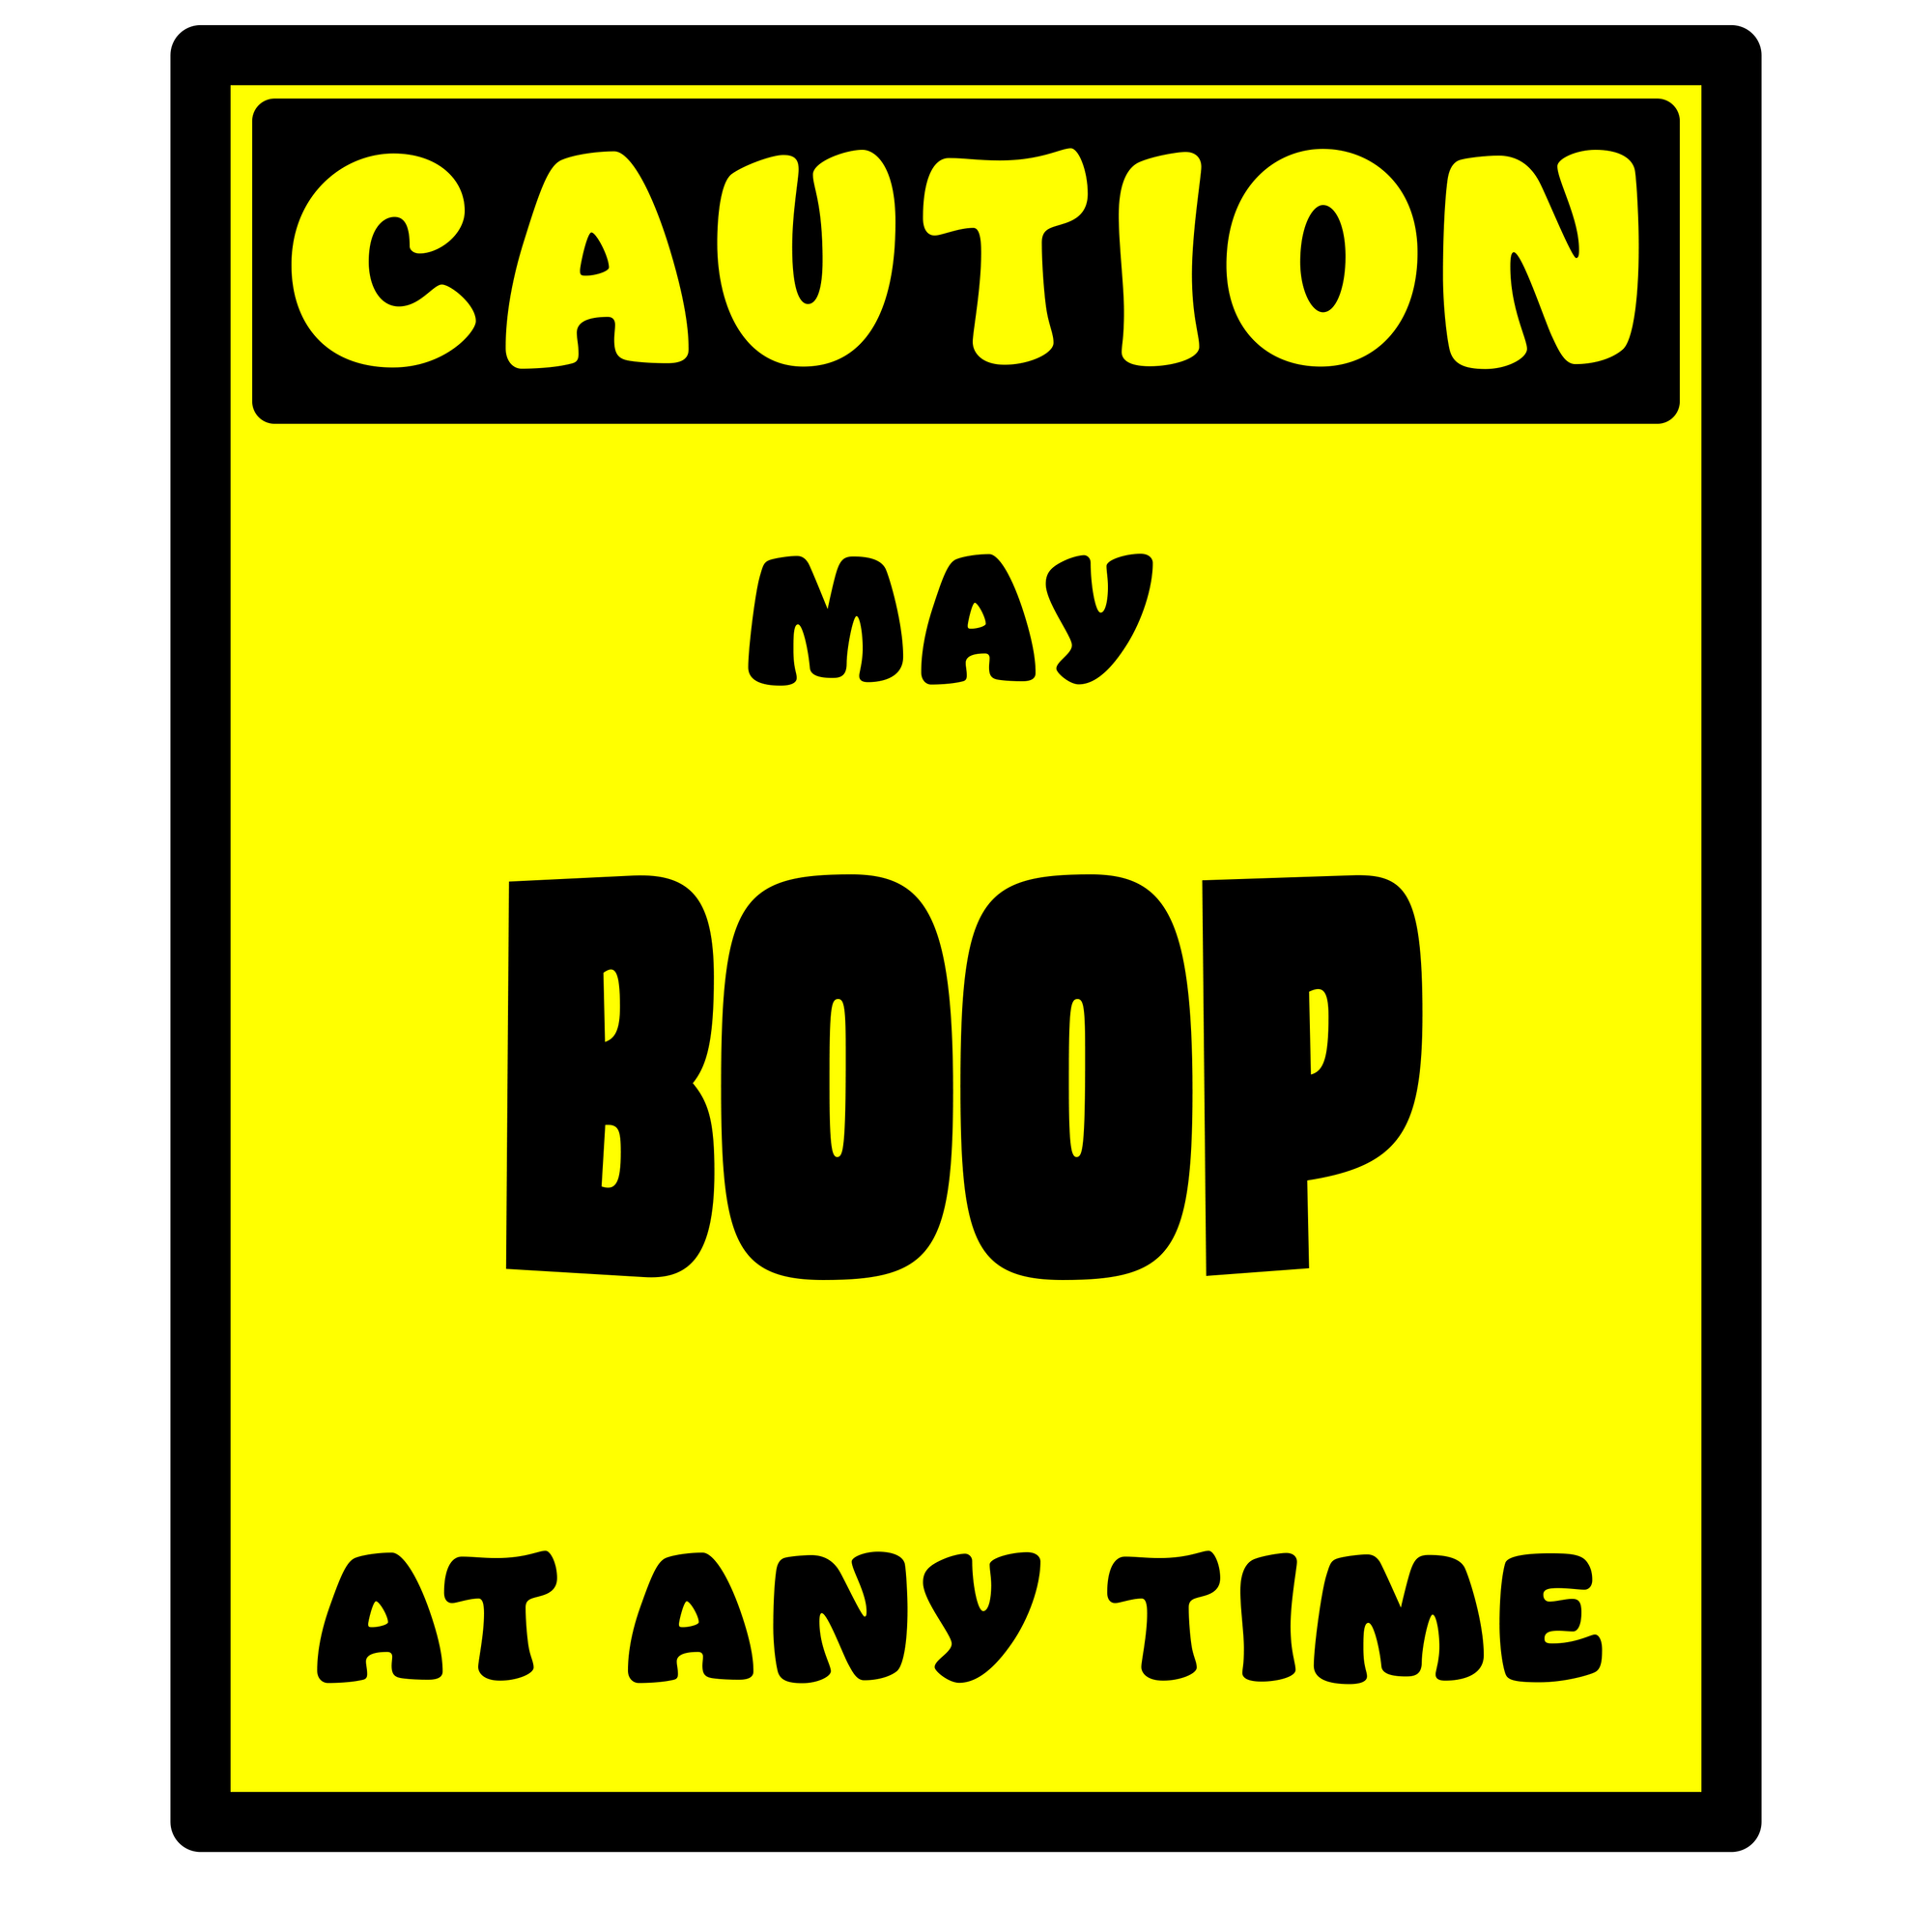 Whootorca - Caution! Series - CAUTION! May BOOP at any time!